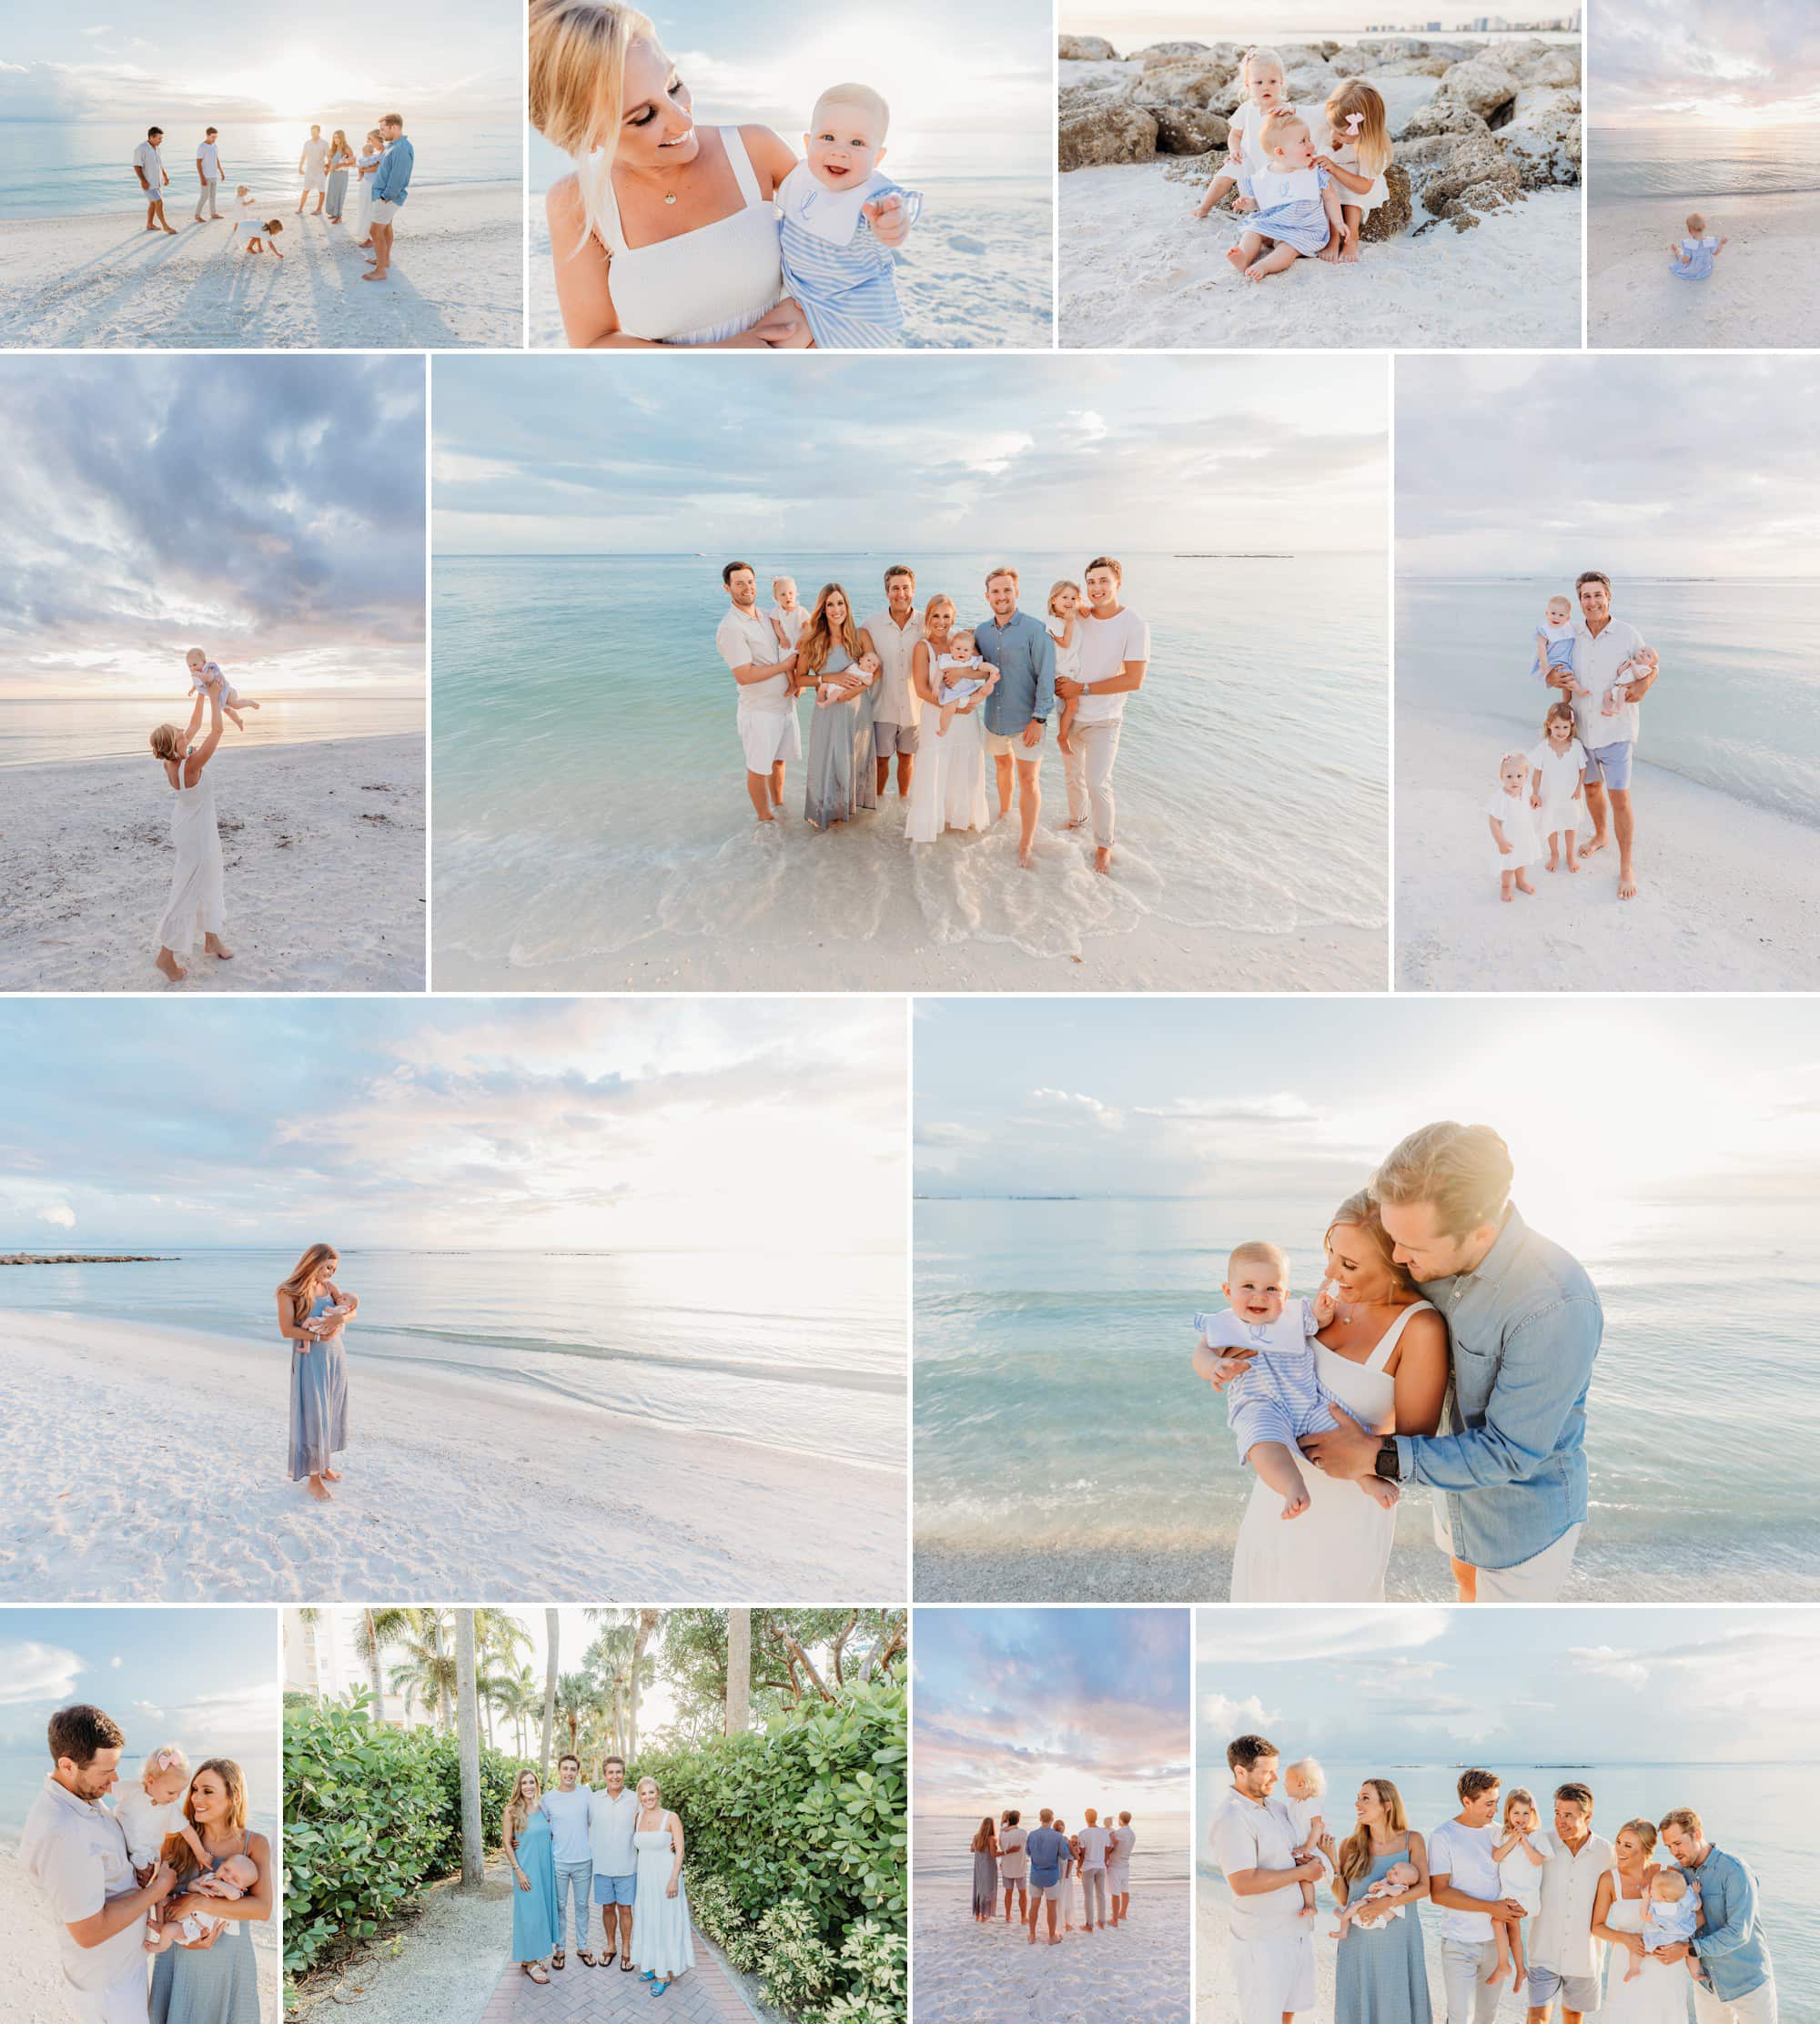 Coastal blues and greens were the theme of this gorgeous night on Marco Island Beach. Family photo shoot included the whole family at sunset.